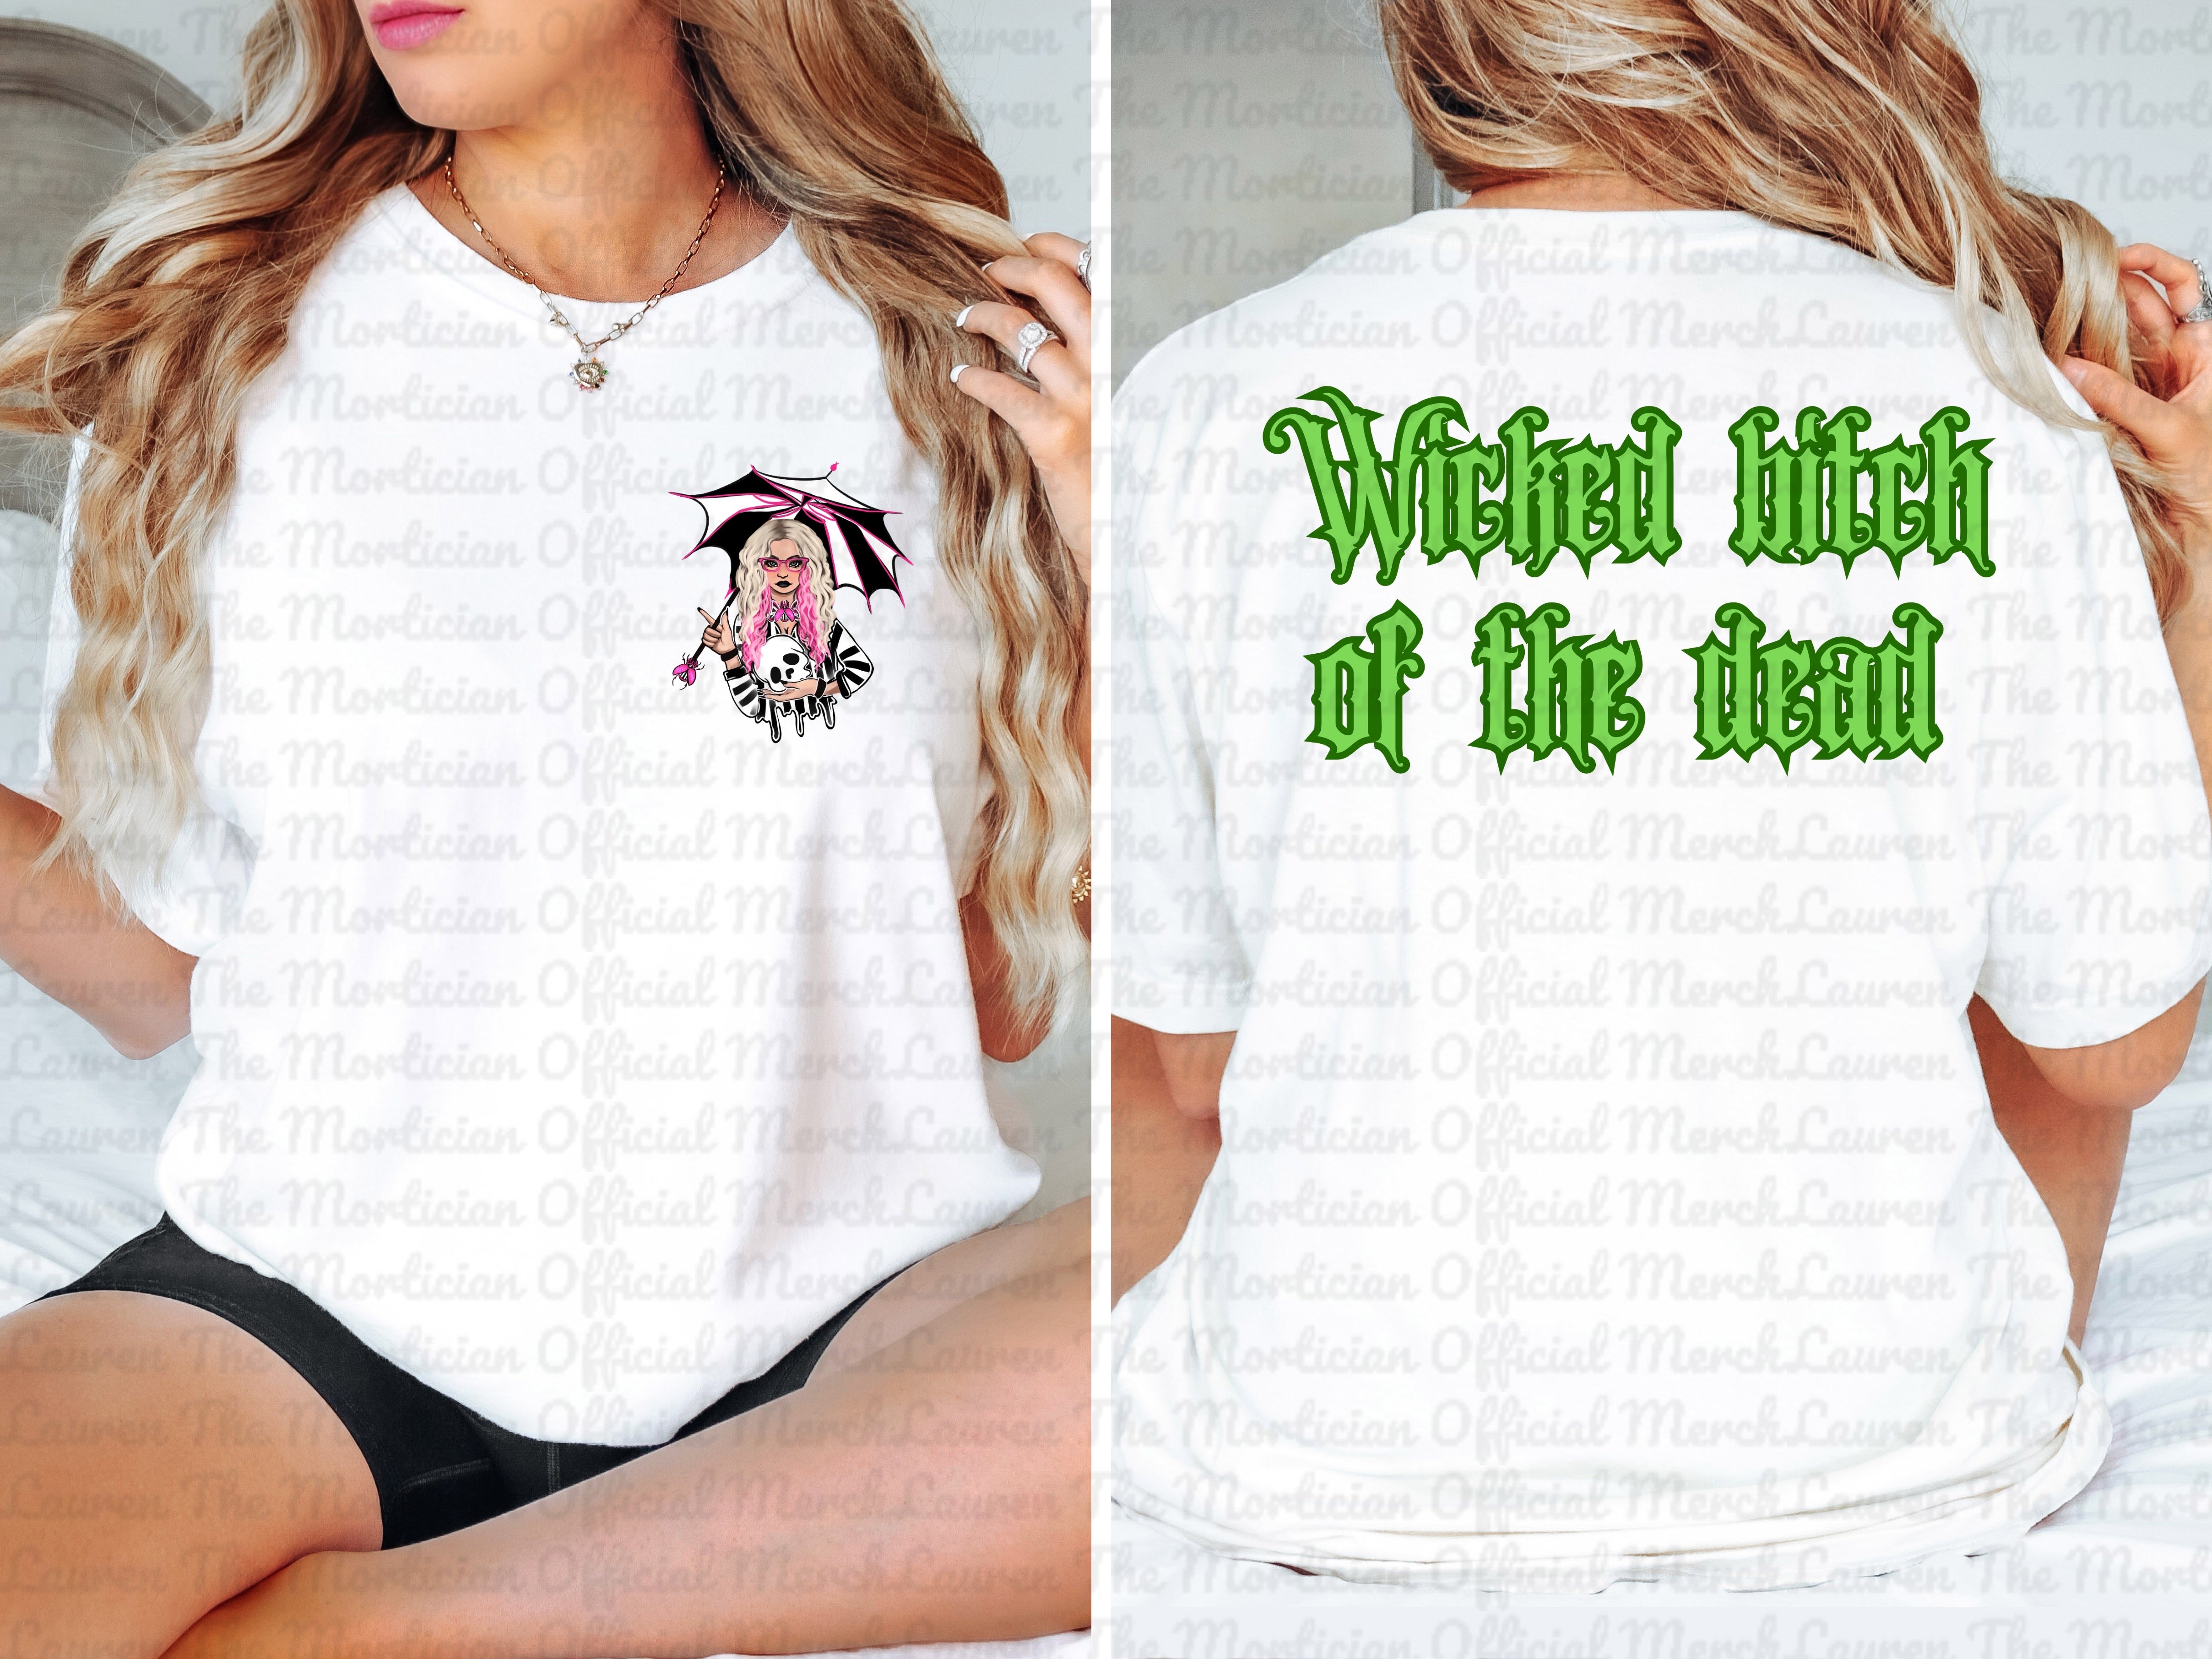 Wicked Bitch Of The Dead Front & Back Top Design